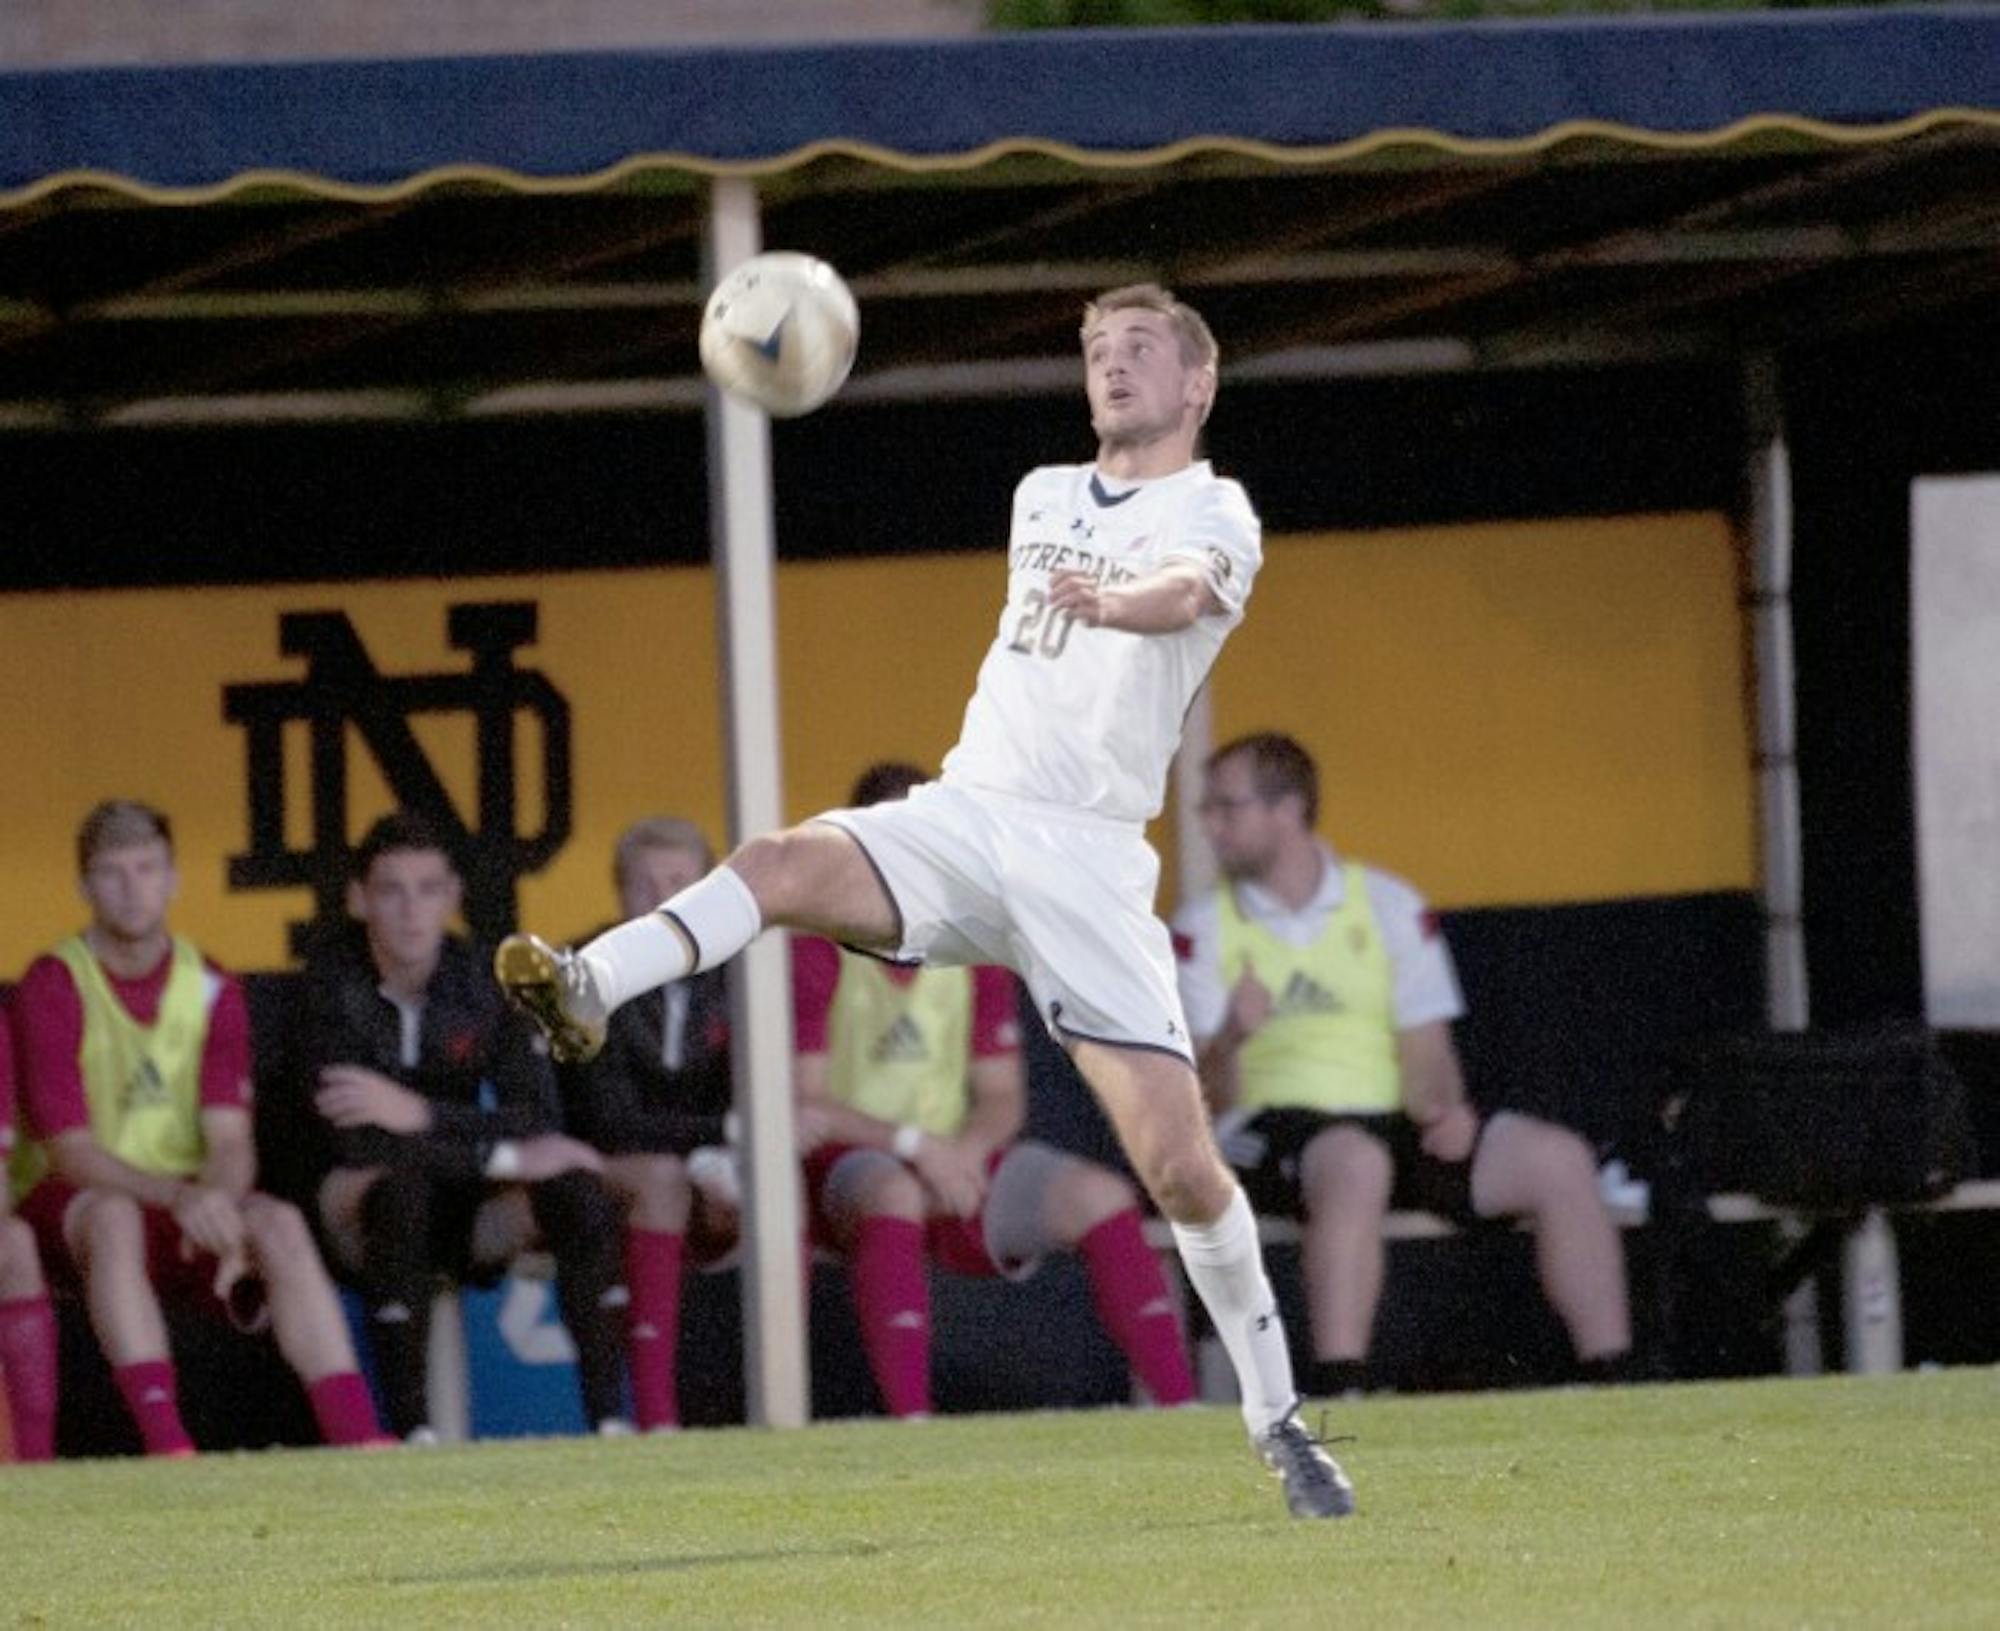 Irish junior midfielder Blake Townes looks to corral a loose ball during Notre Dame’s 4-0 victory over Indiana on Tuesday at Alumni Stadium.